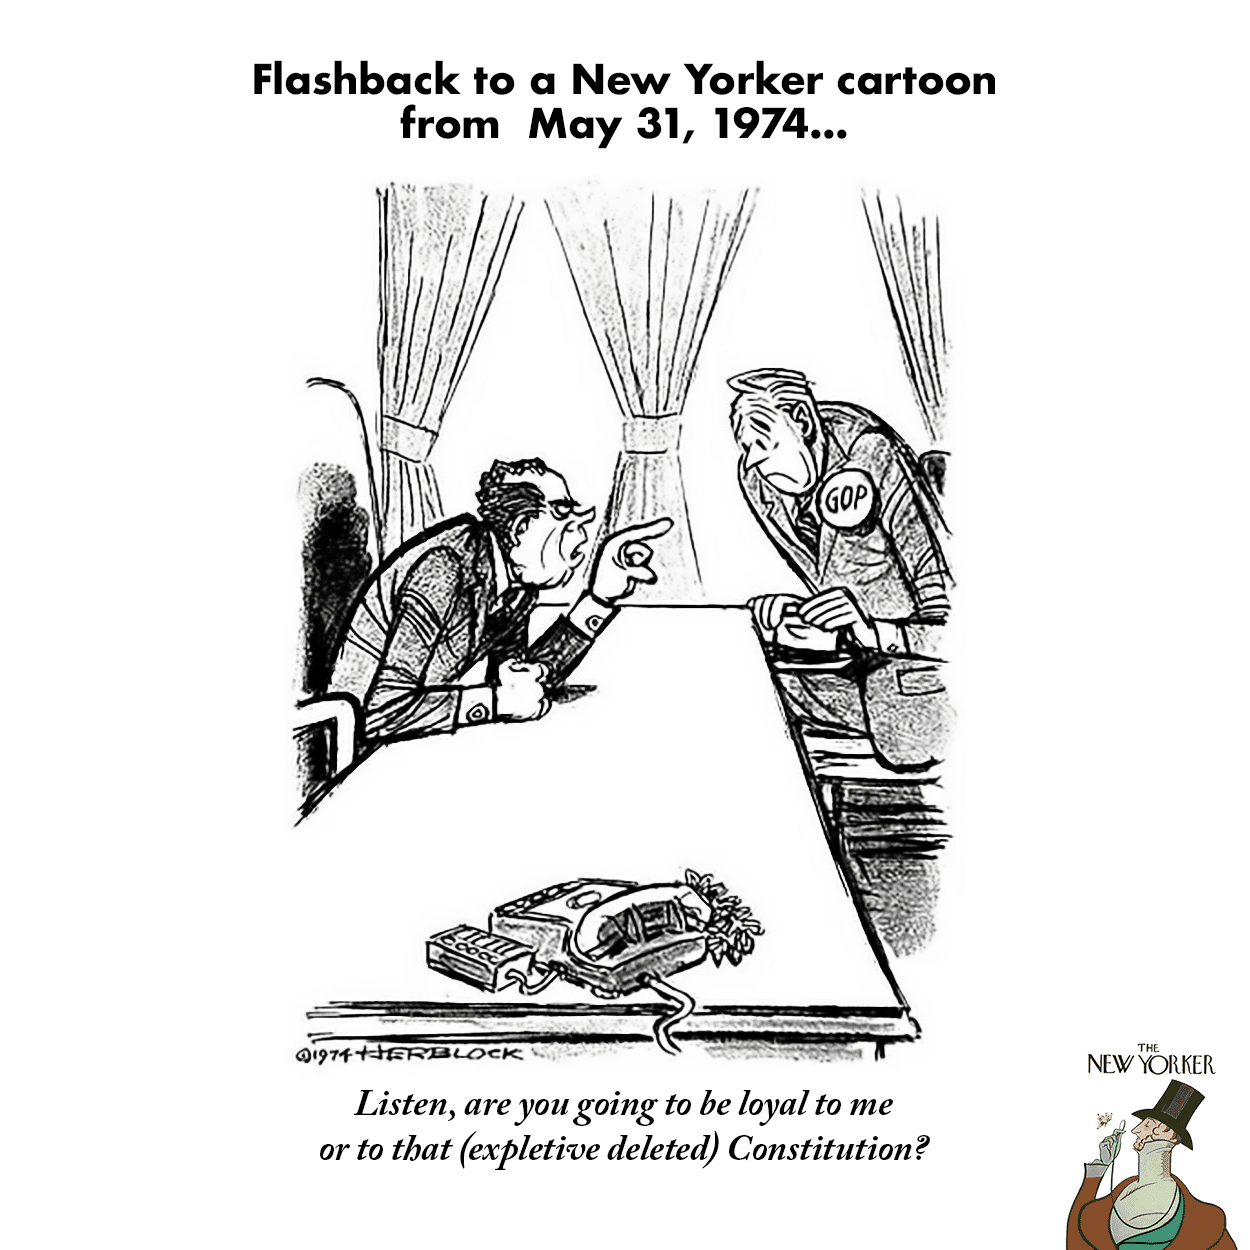 political political-memes political text: Flashback to a New Yorker cartoon from May 31, 1974... GOP NEW Listen, are you going to be loyal to me or to that (expletive deleted) Constitution? 